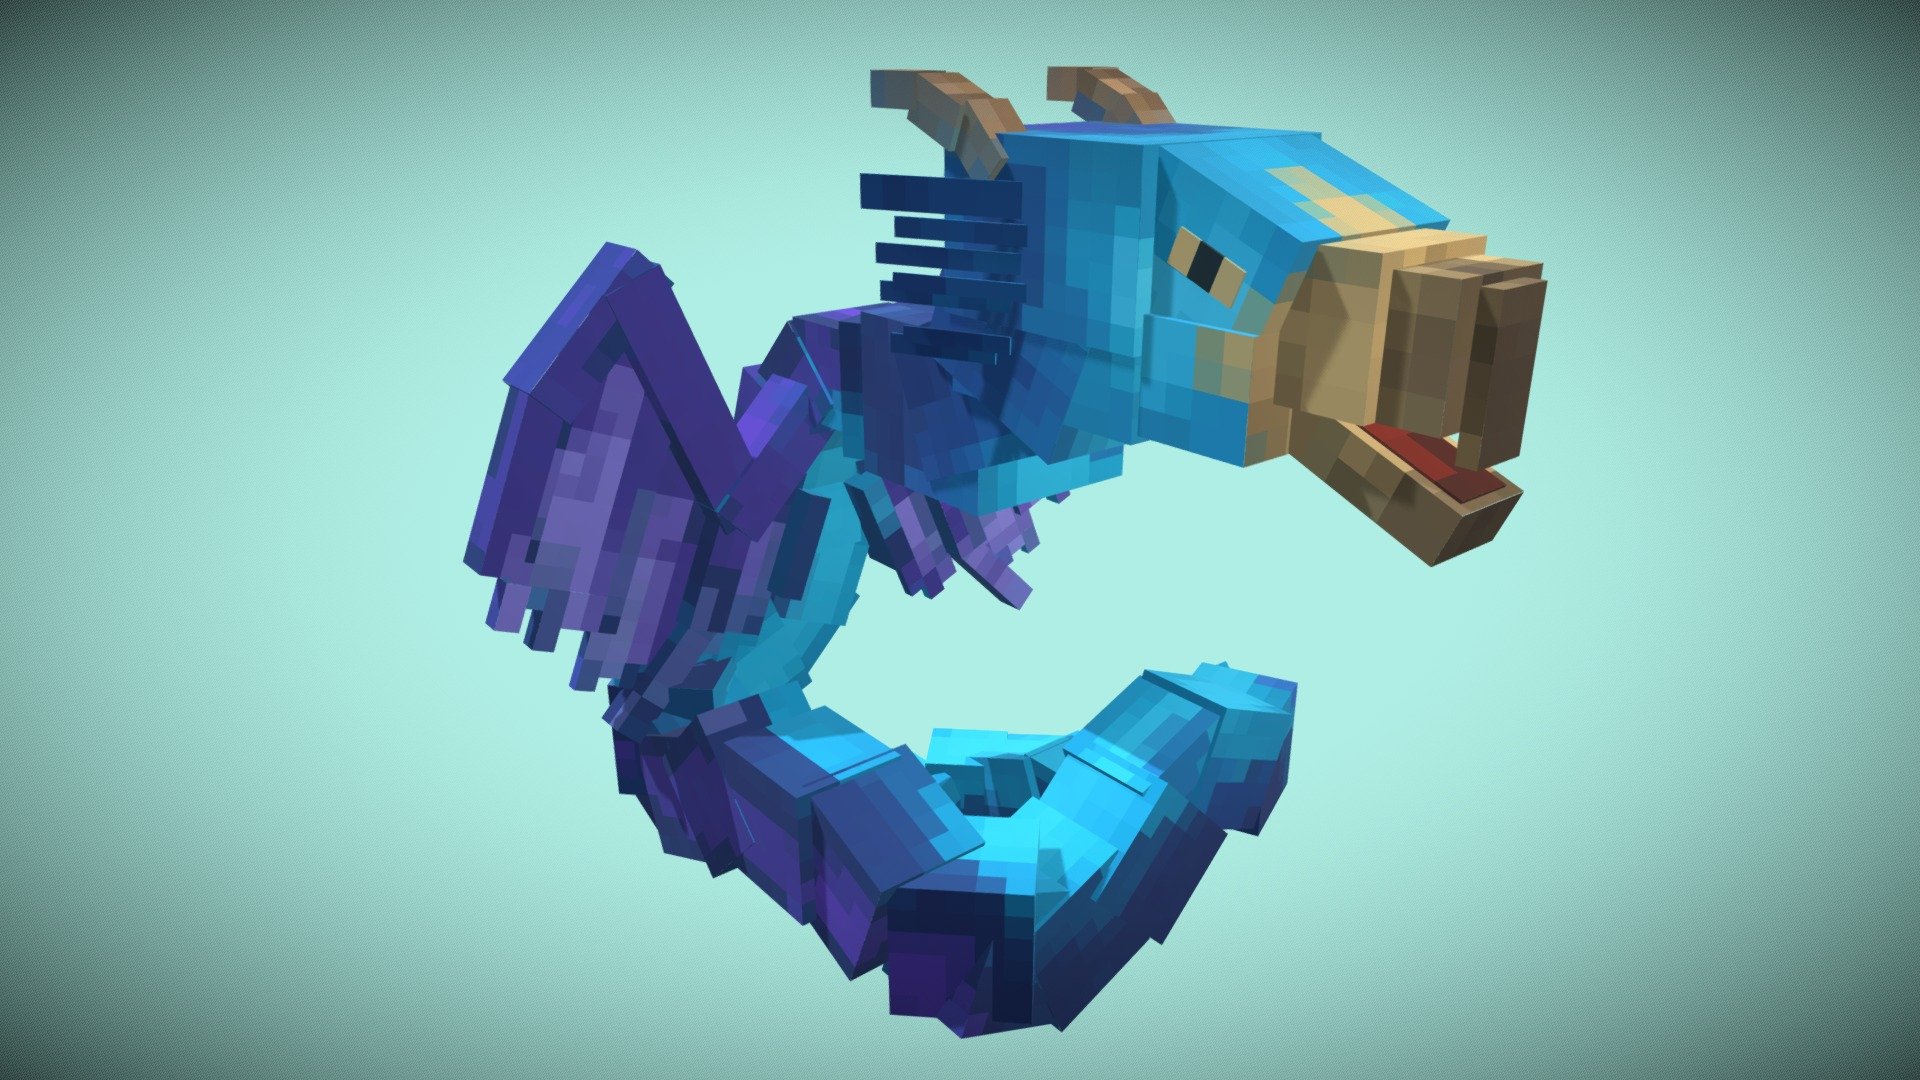 This is an Occamy creature from the Wizarding World universe, created for the game Minecraft. It is compatible with the vanilla Minecraft version, and you can easily add it to your texture pack without any issues. It looks great when placed on your shoulder as a companion creature 3d model